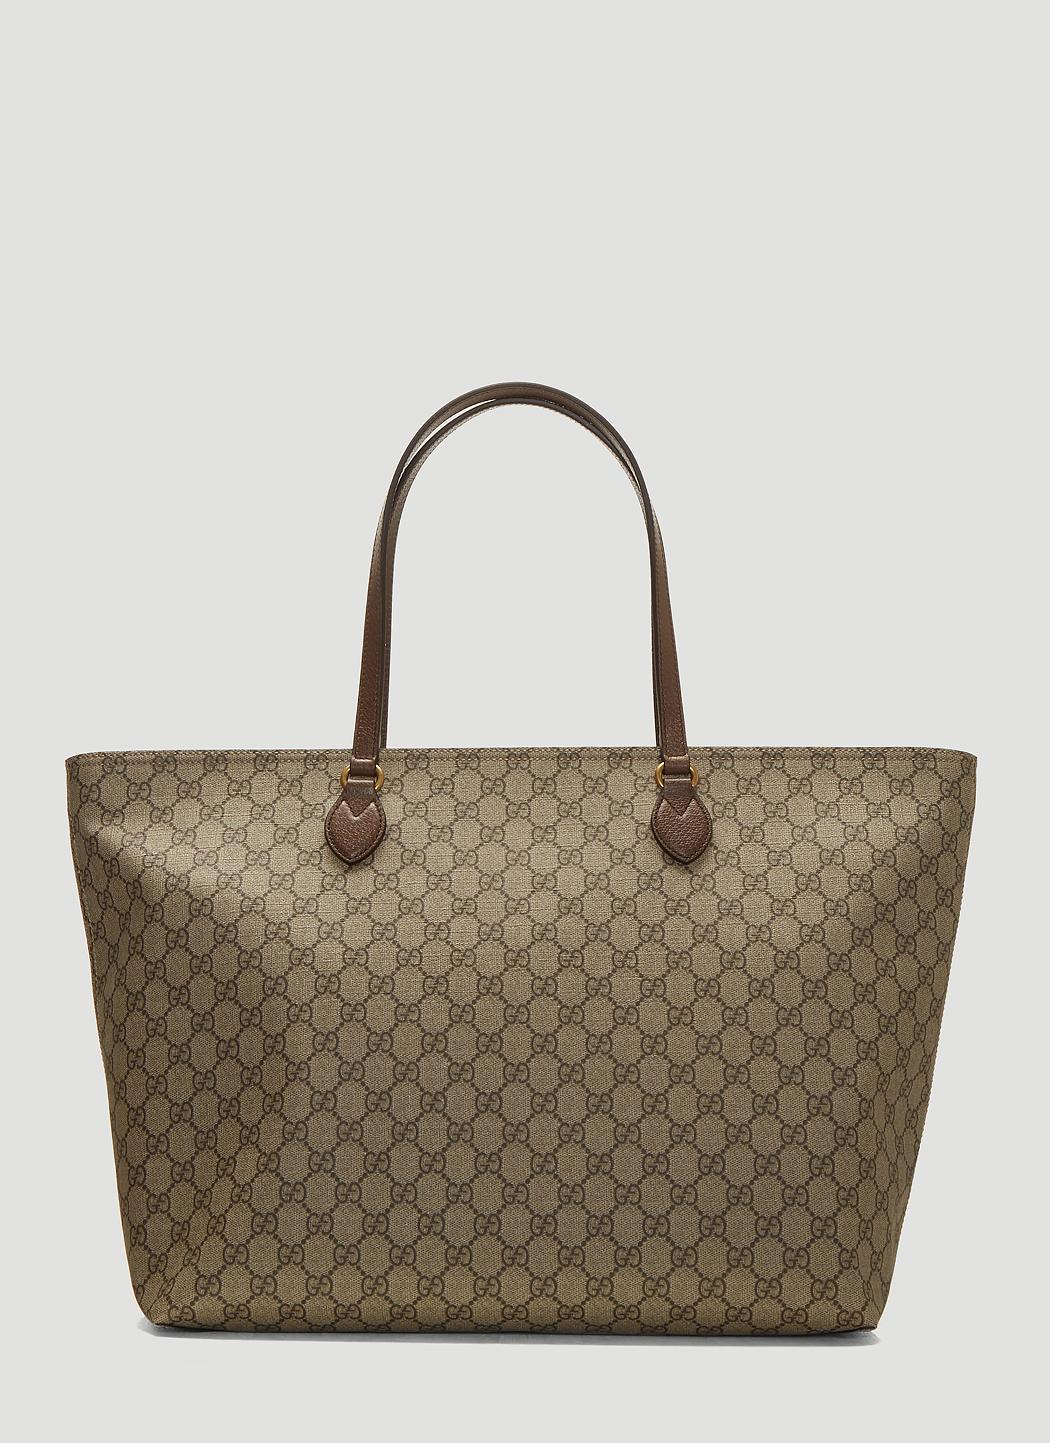 Gucci Canvas Ophidia GG Supreme Tote Bag In Beige in Natural - Lyst